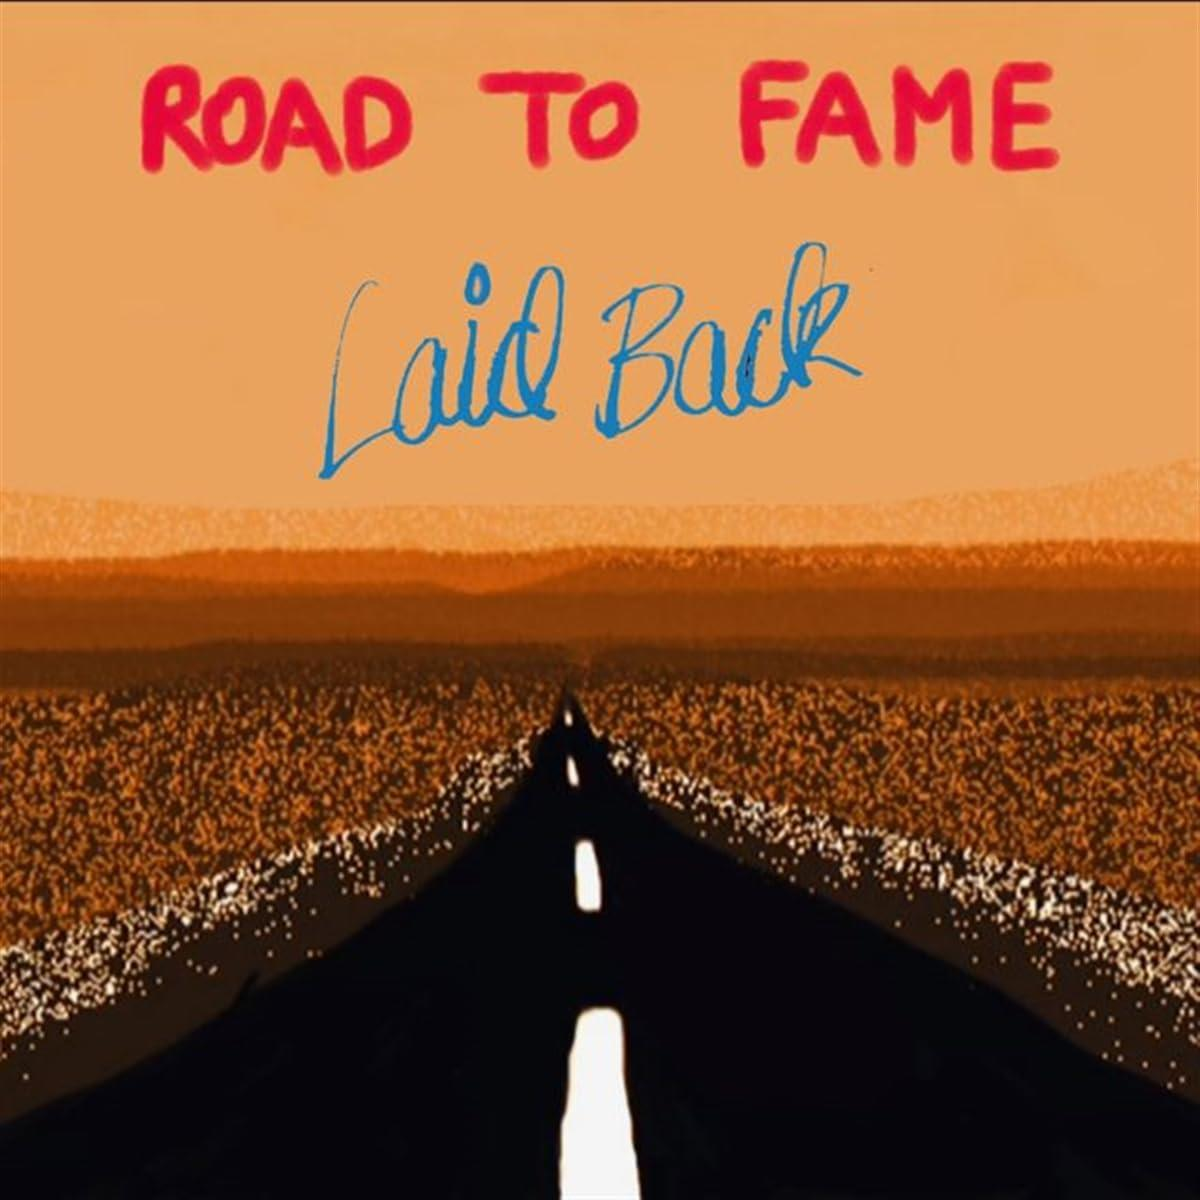 Laid Back - Road To (CD) - Fame